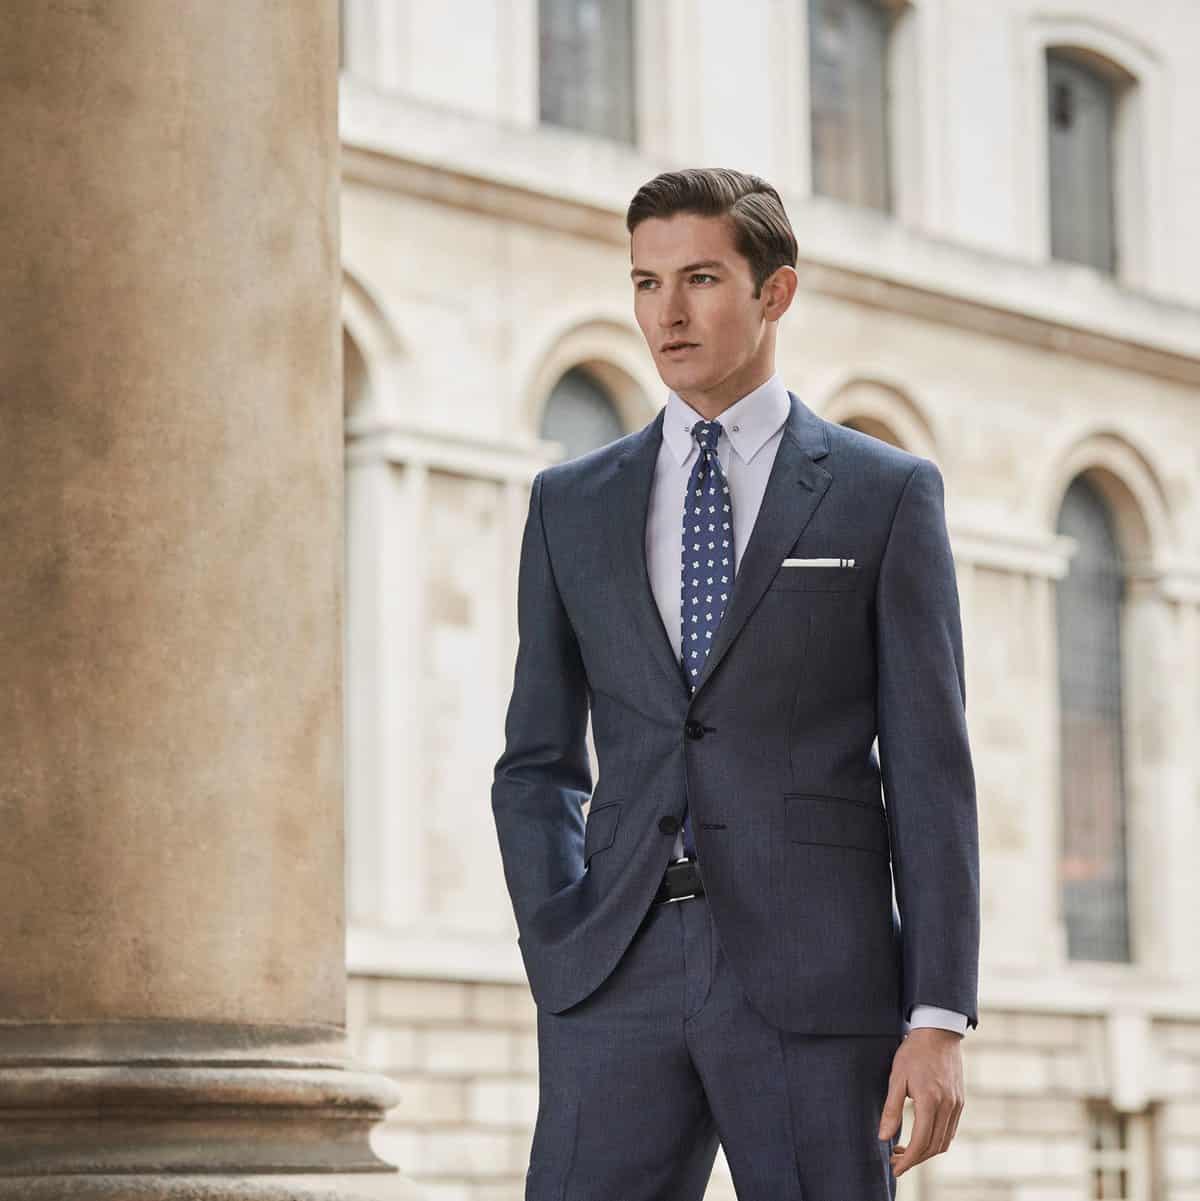 These are the 50 Best Suit Brands for Men